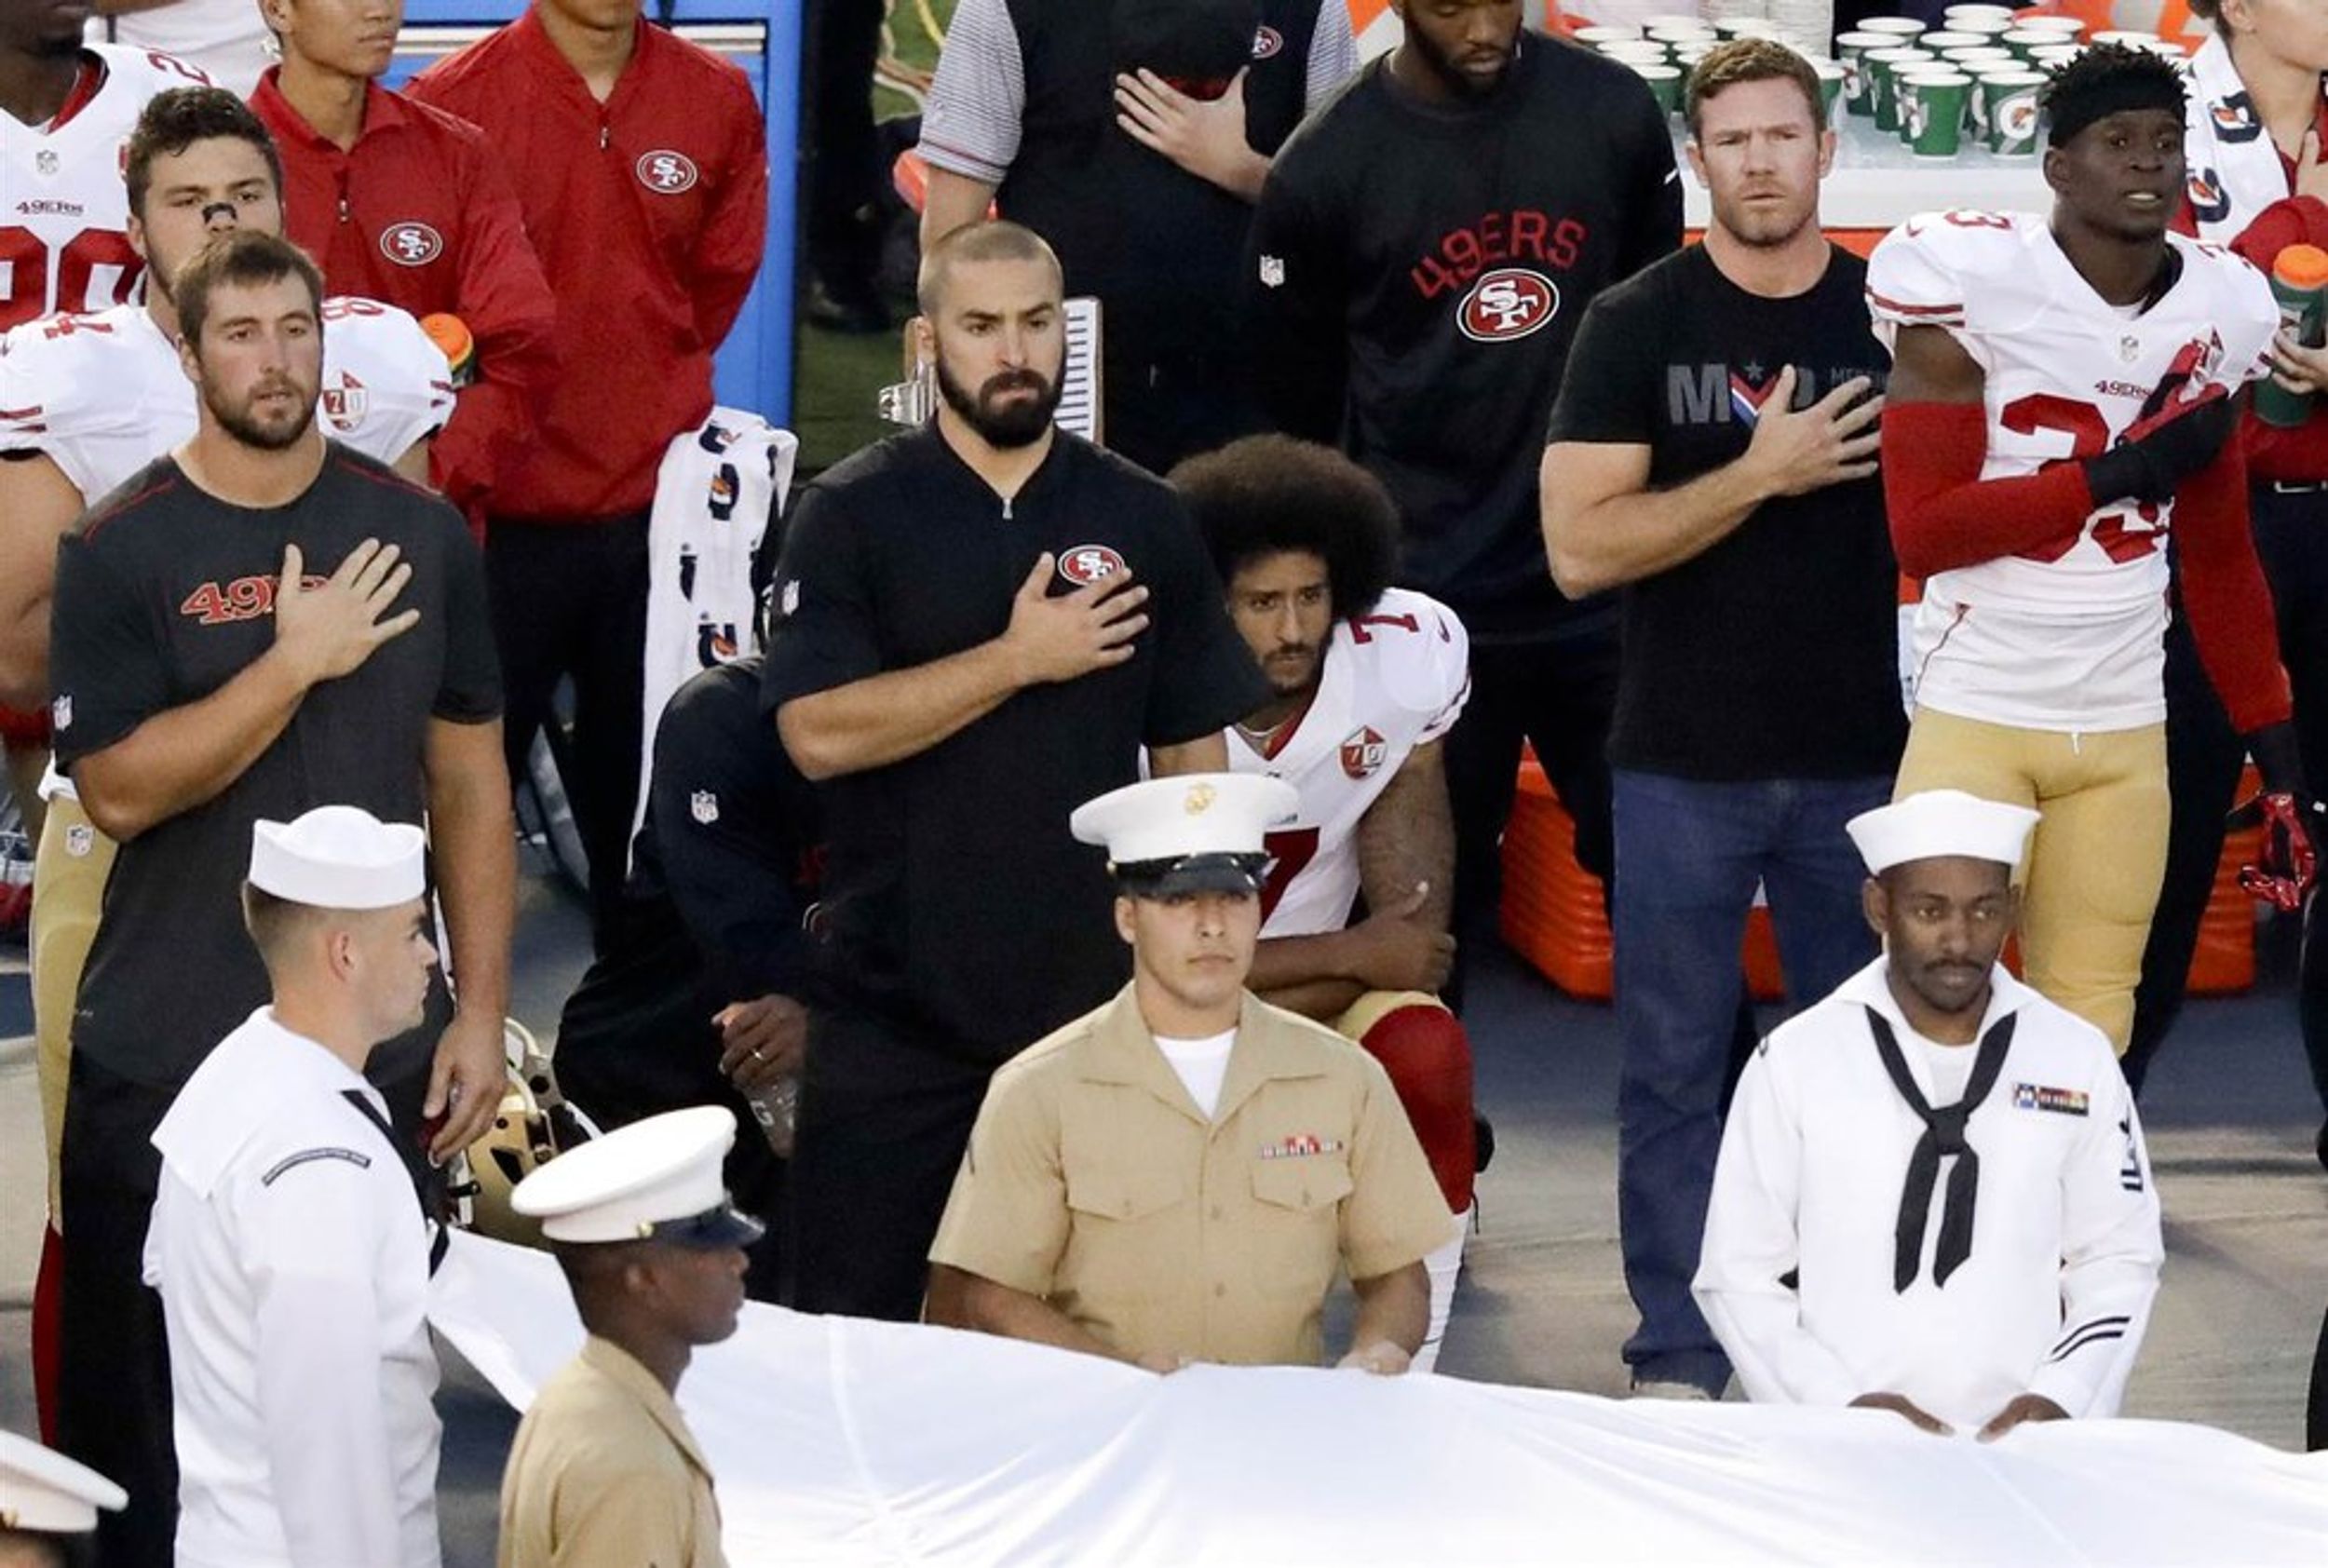 Land Of The Mostly Free, Home Of The Disillusioned: Why I Support Colin Kaepernick